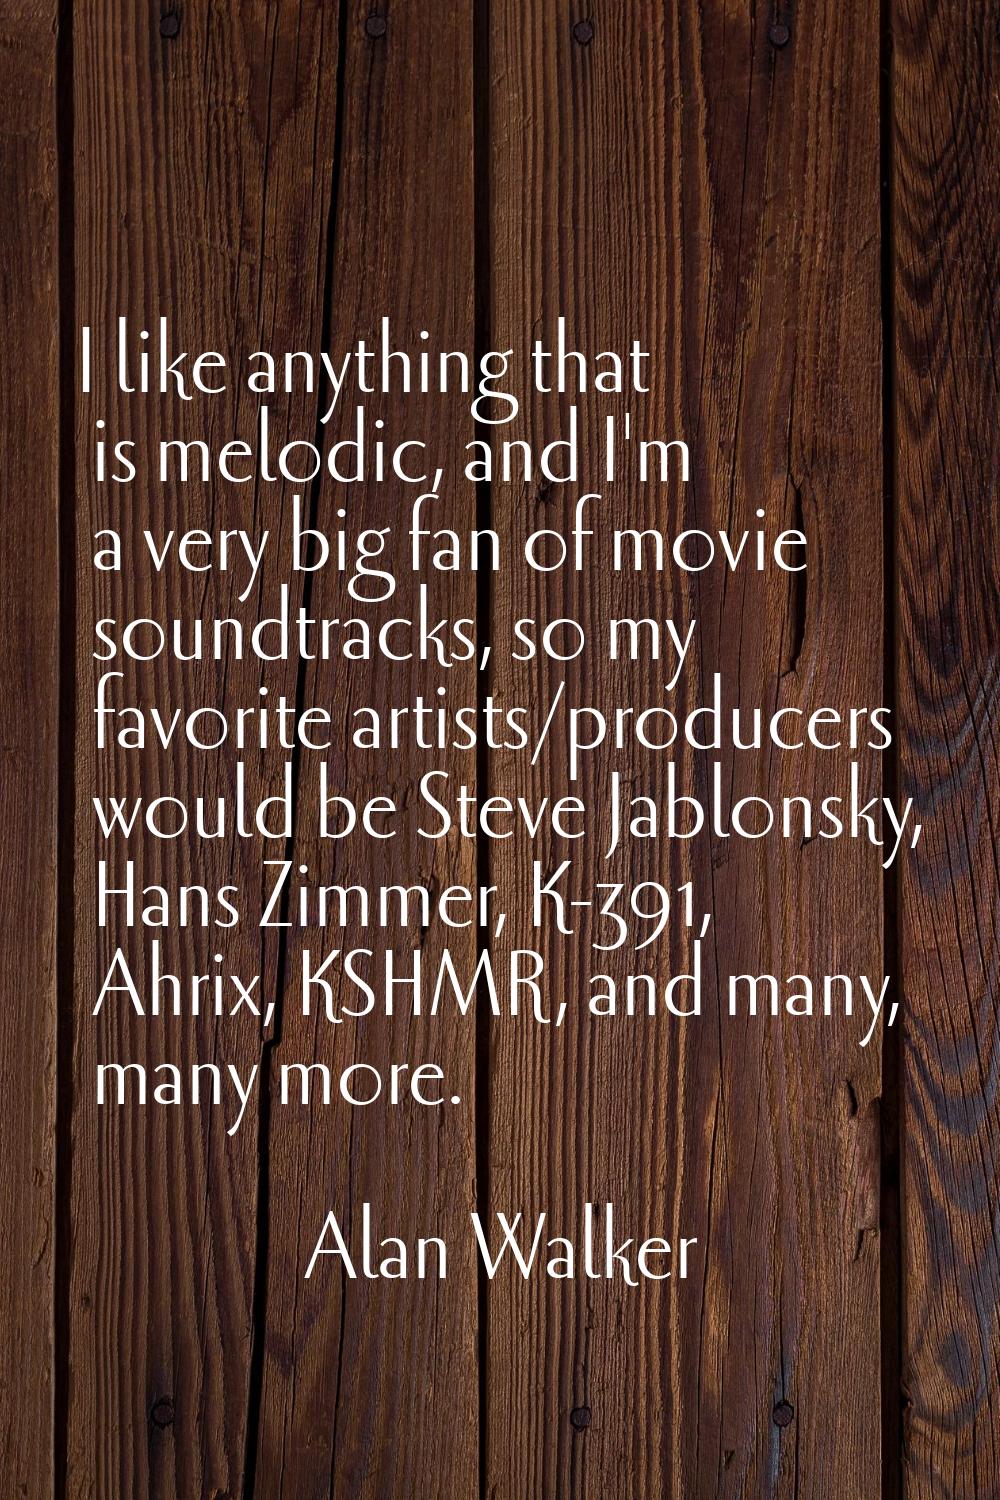 I like anything that is melodic, and I'm a very big fan of movie soundtracks, so my favorite artist